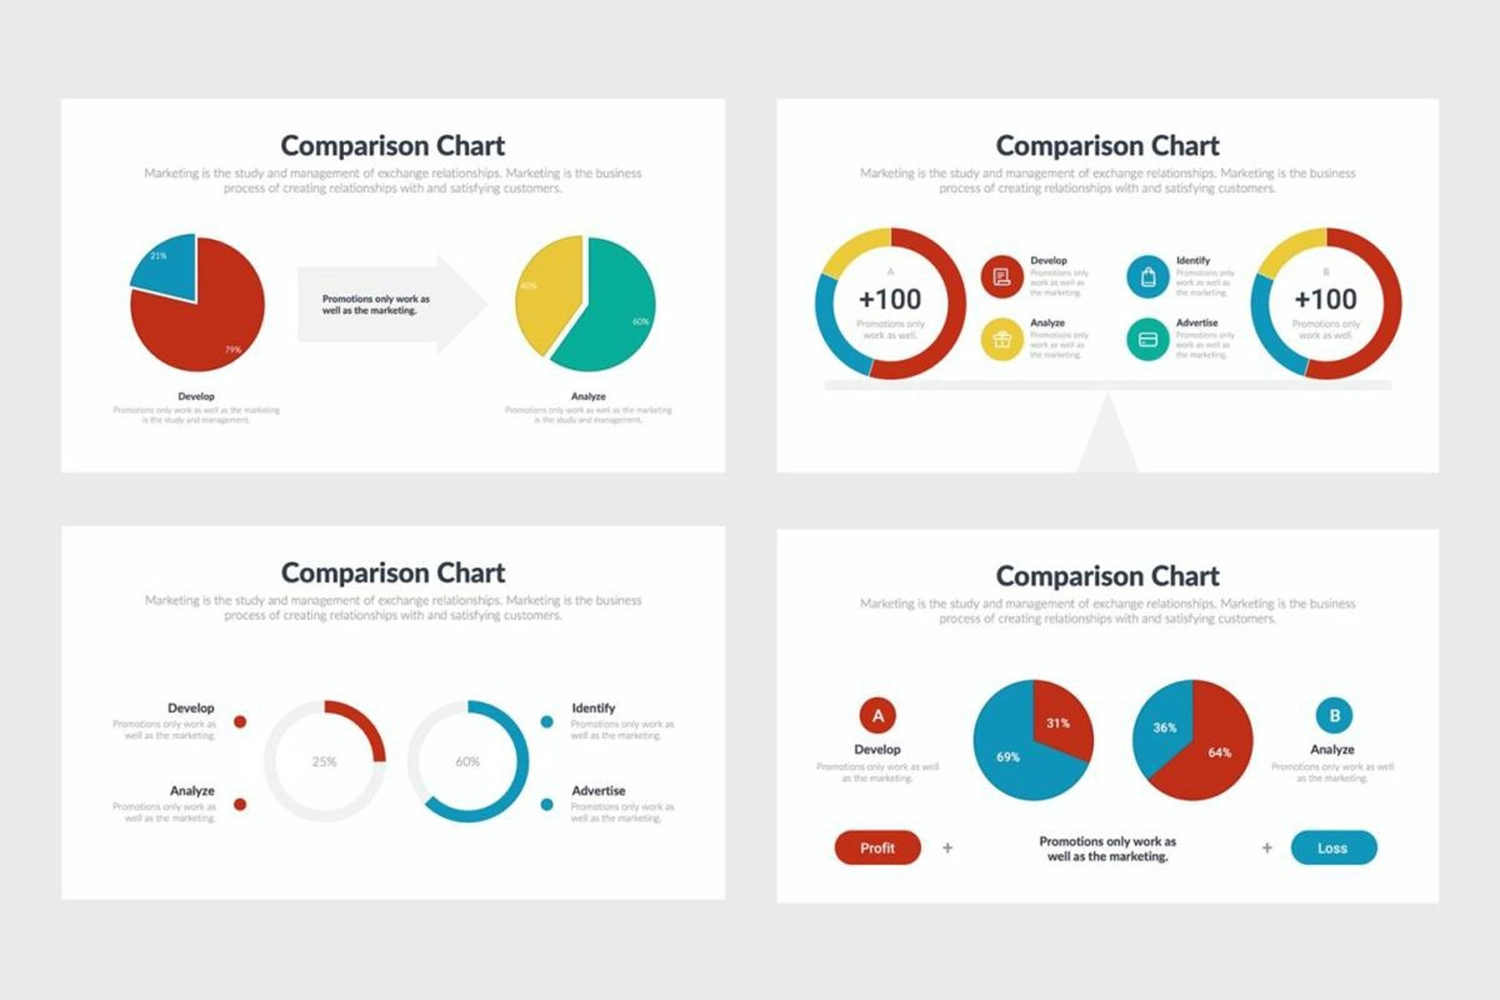 Report PowerPoint template